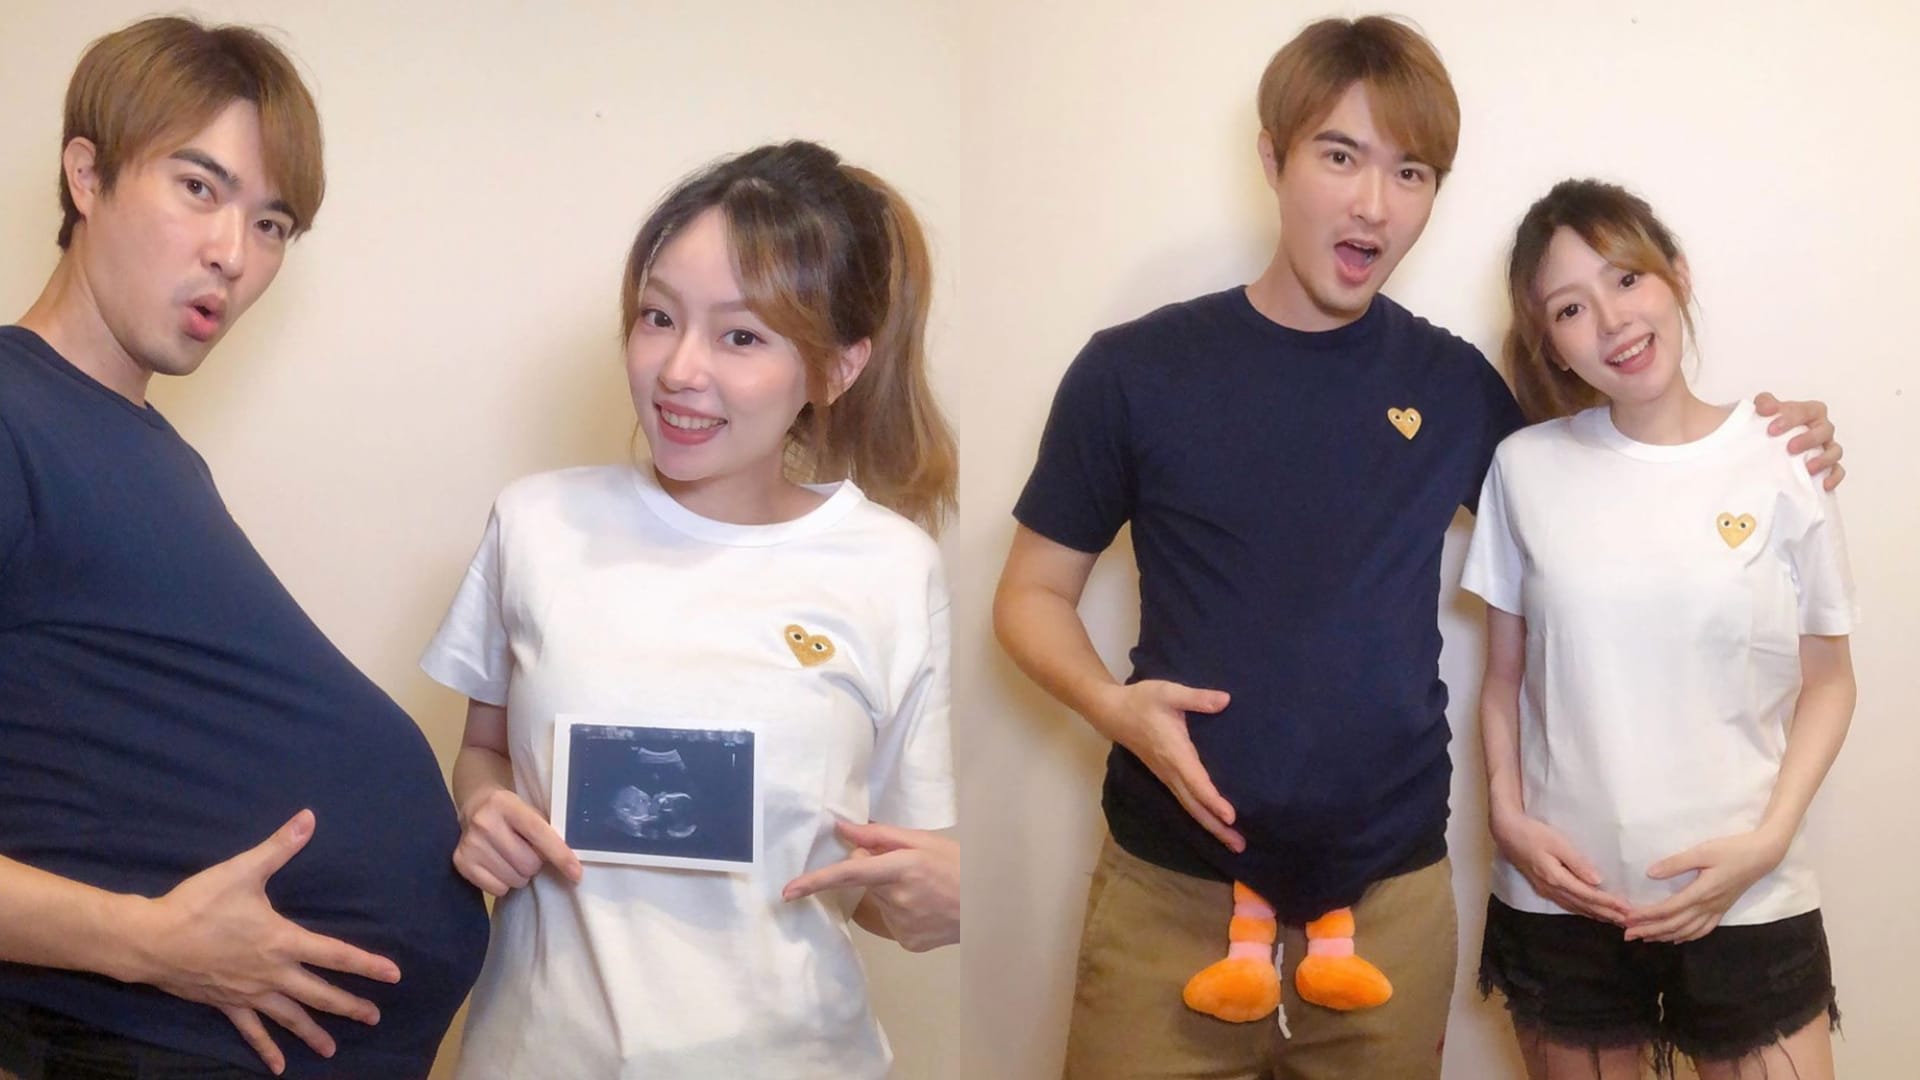 Lee Teng Just Announced That His Fiancée Is Pregnant